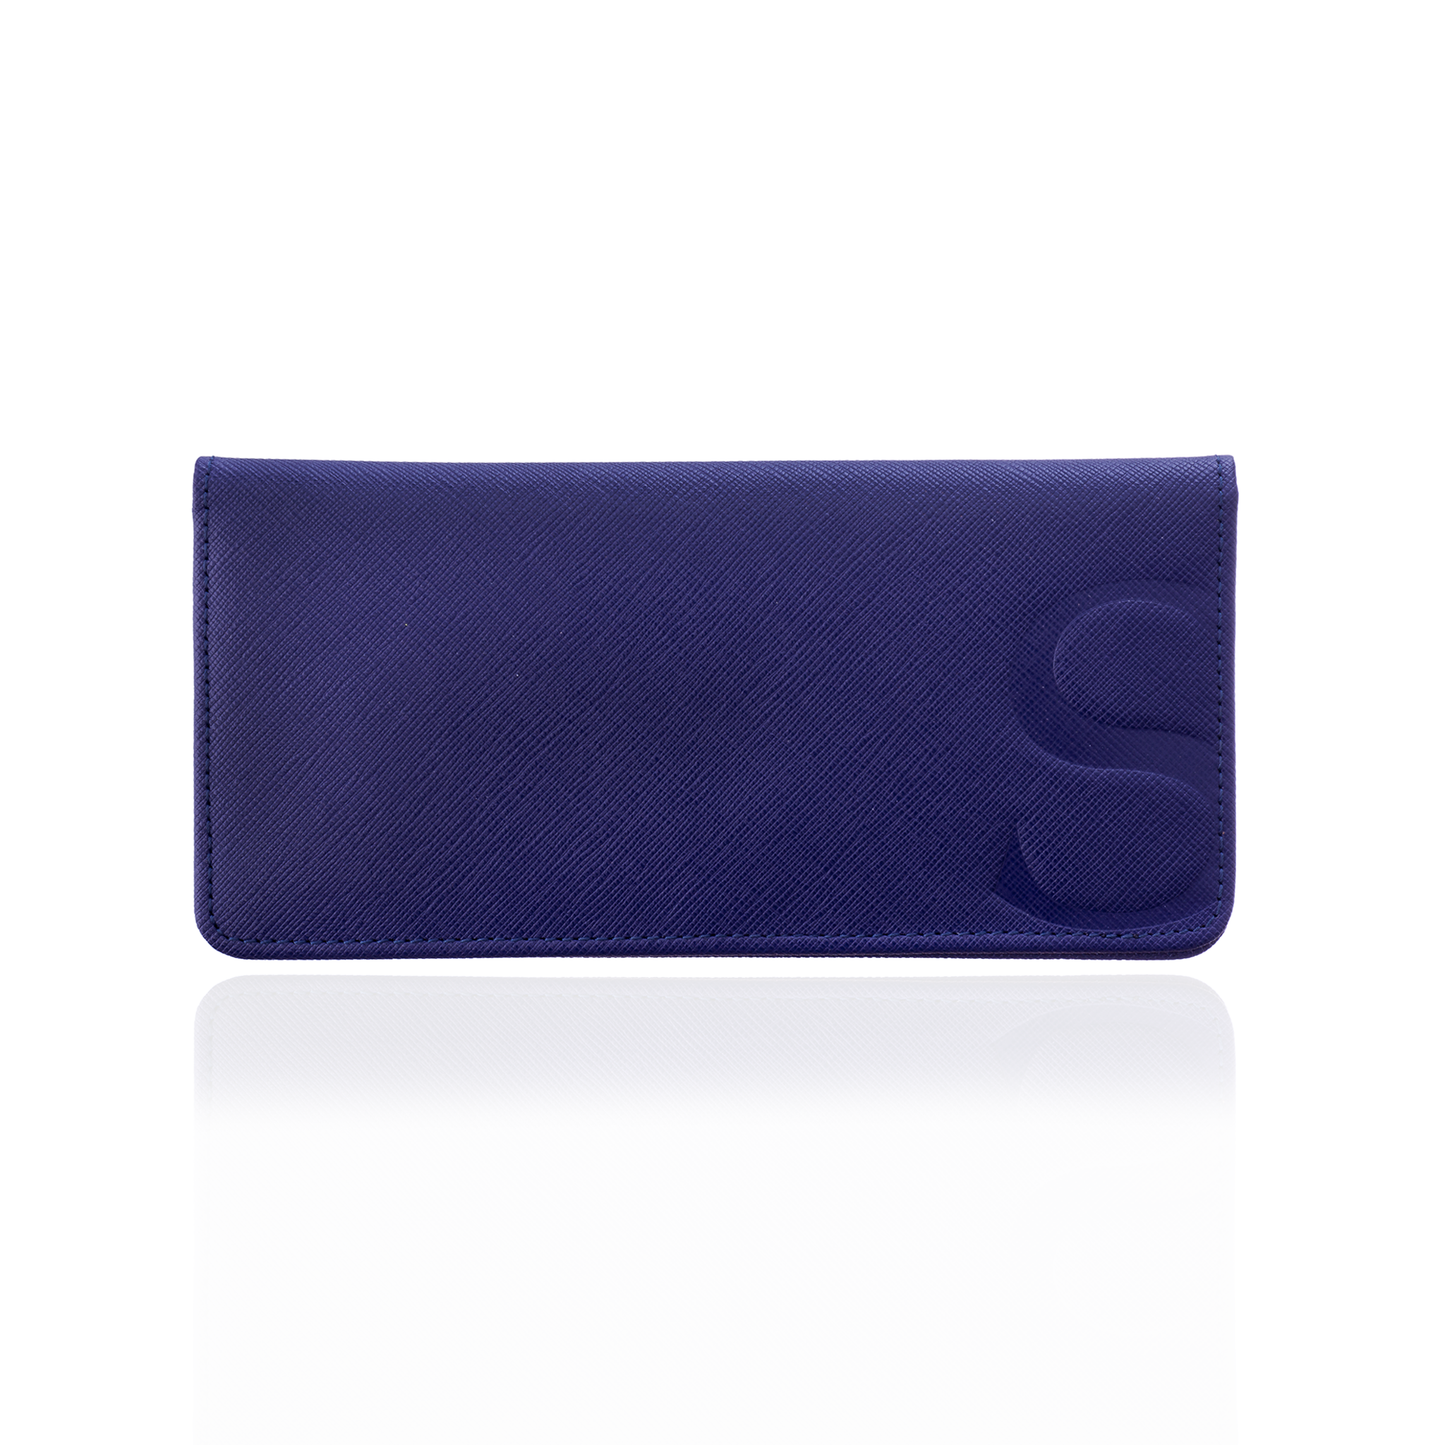 Small Wallet in Blue Textured Leather – Sazingg